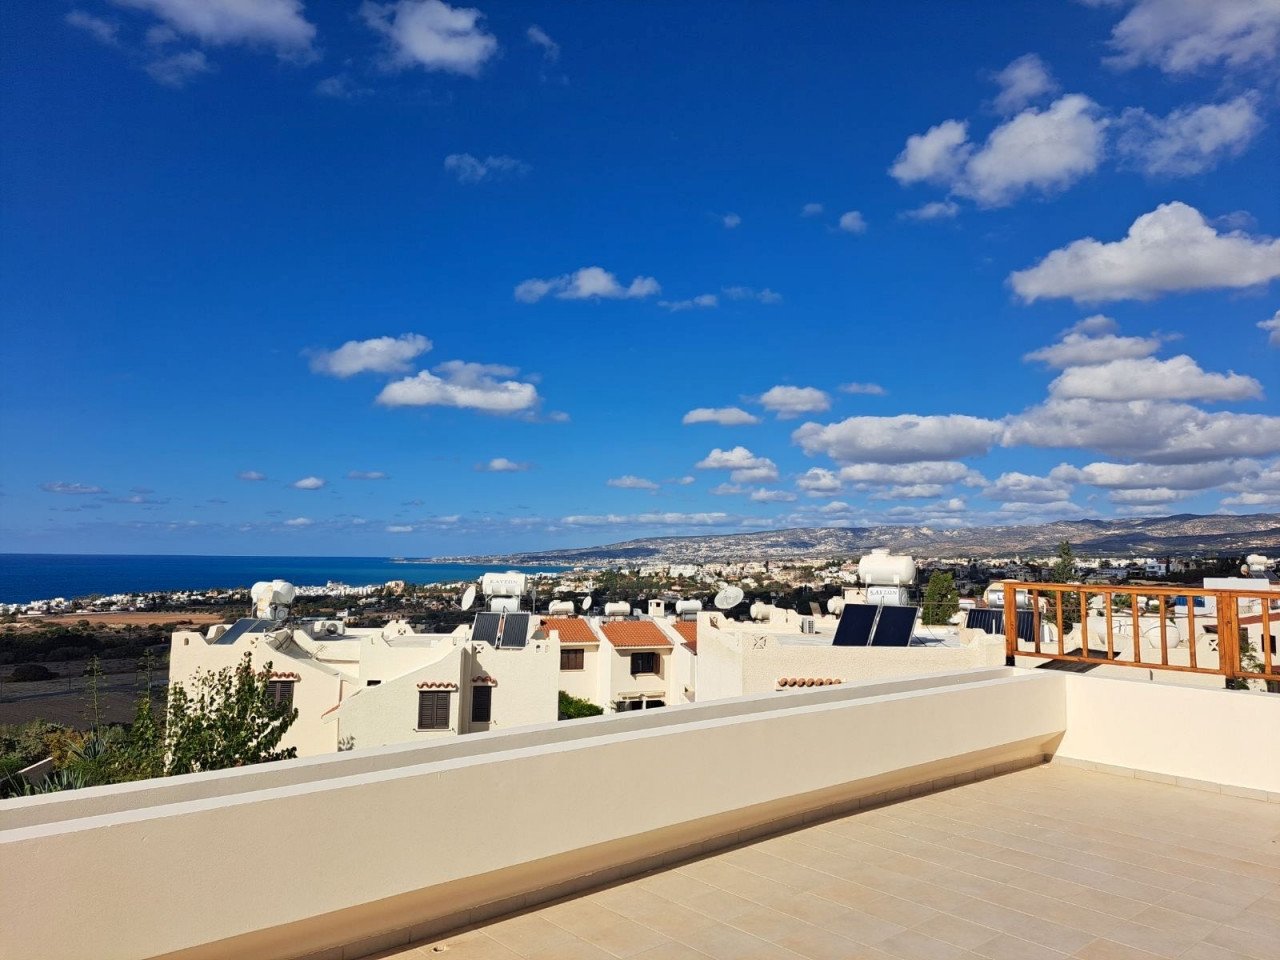 Property for Rent: Apartment (Penthouse) in Chlorakas, Paphos for Rent | Key Realtor Cyprus